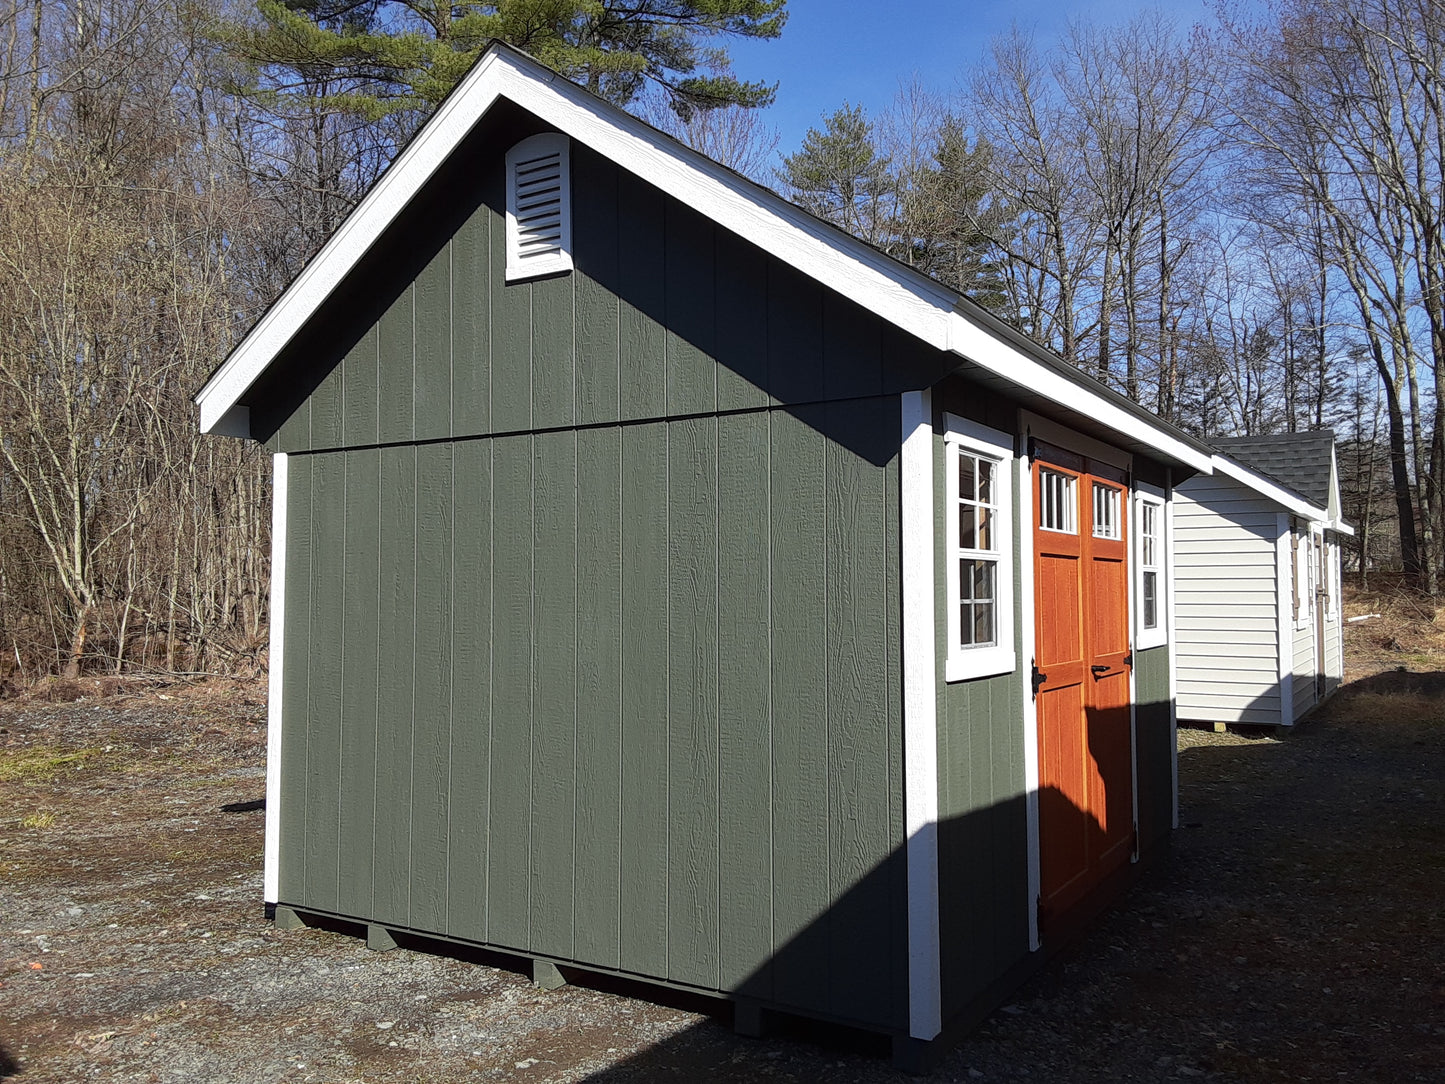 10x12 Garden Shed with SmartTec Siding